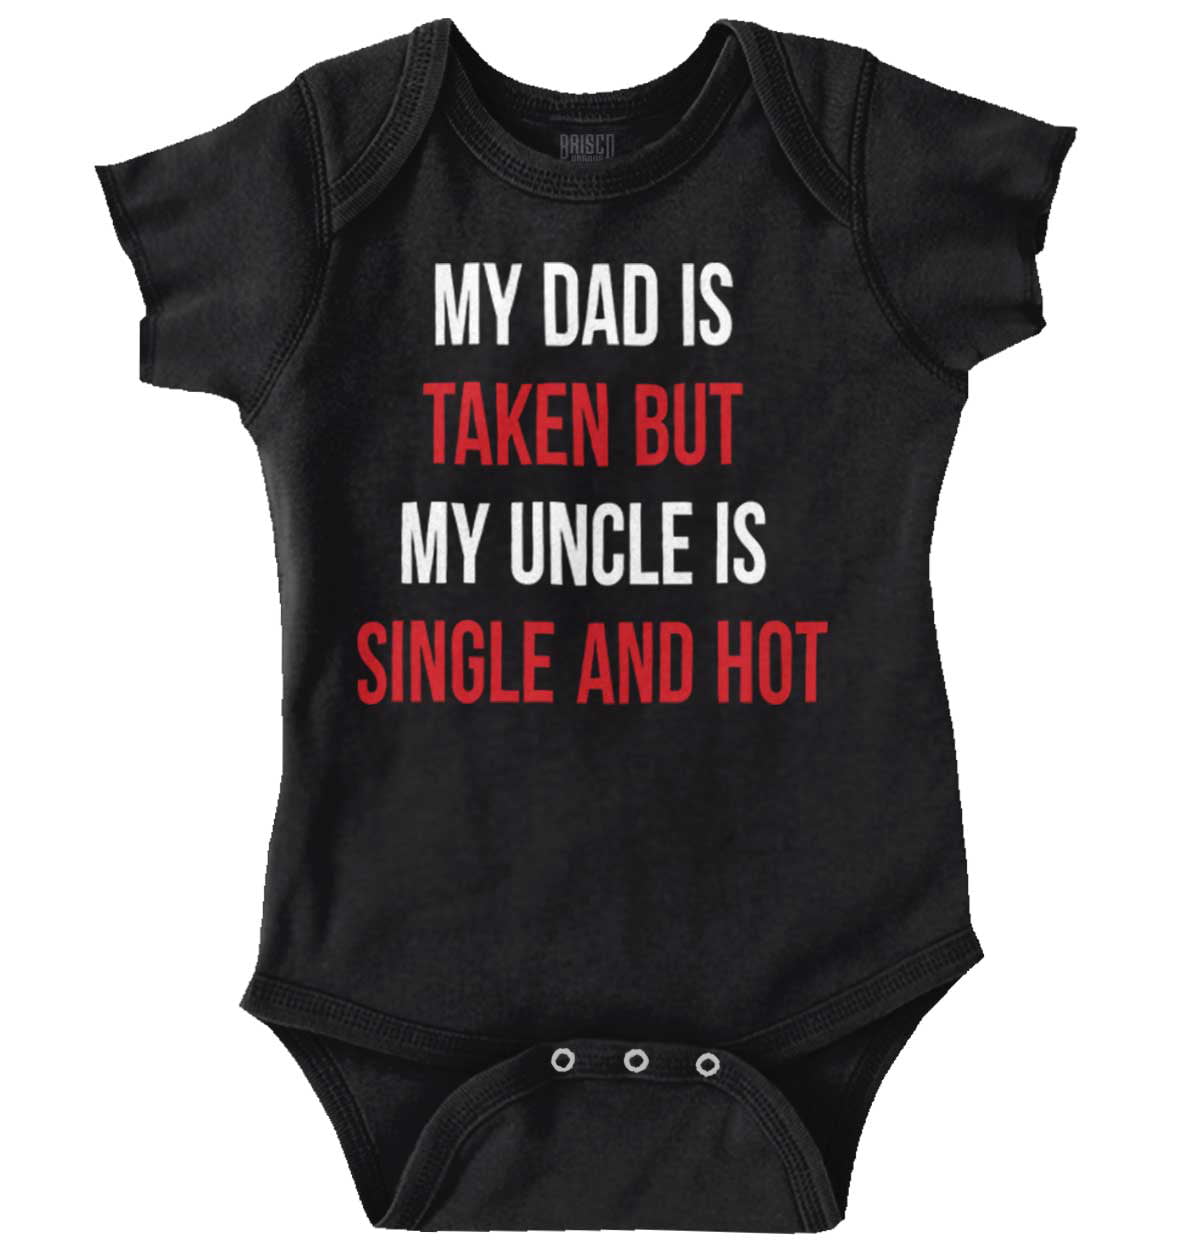 I Love My Auntie and Uncle Baby Grow Funny Heart Bodysuit Vest Body Suit Gift 